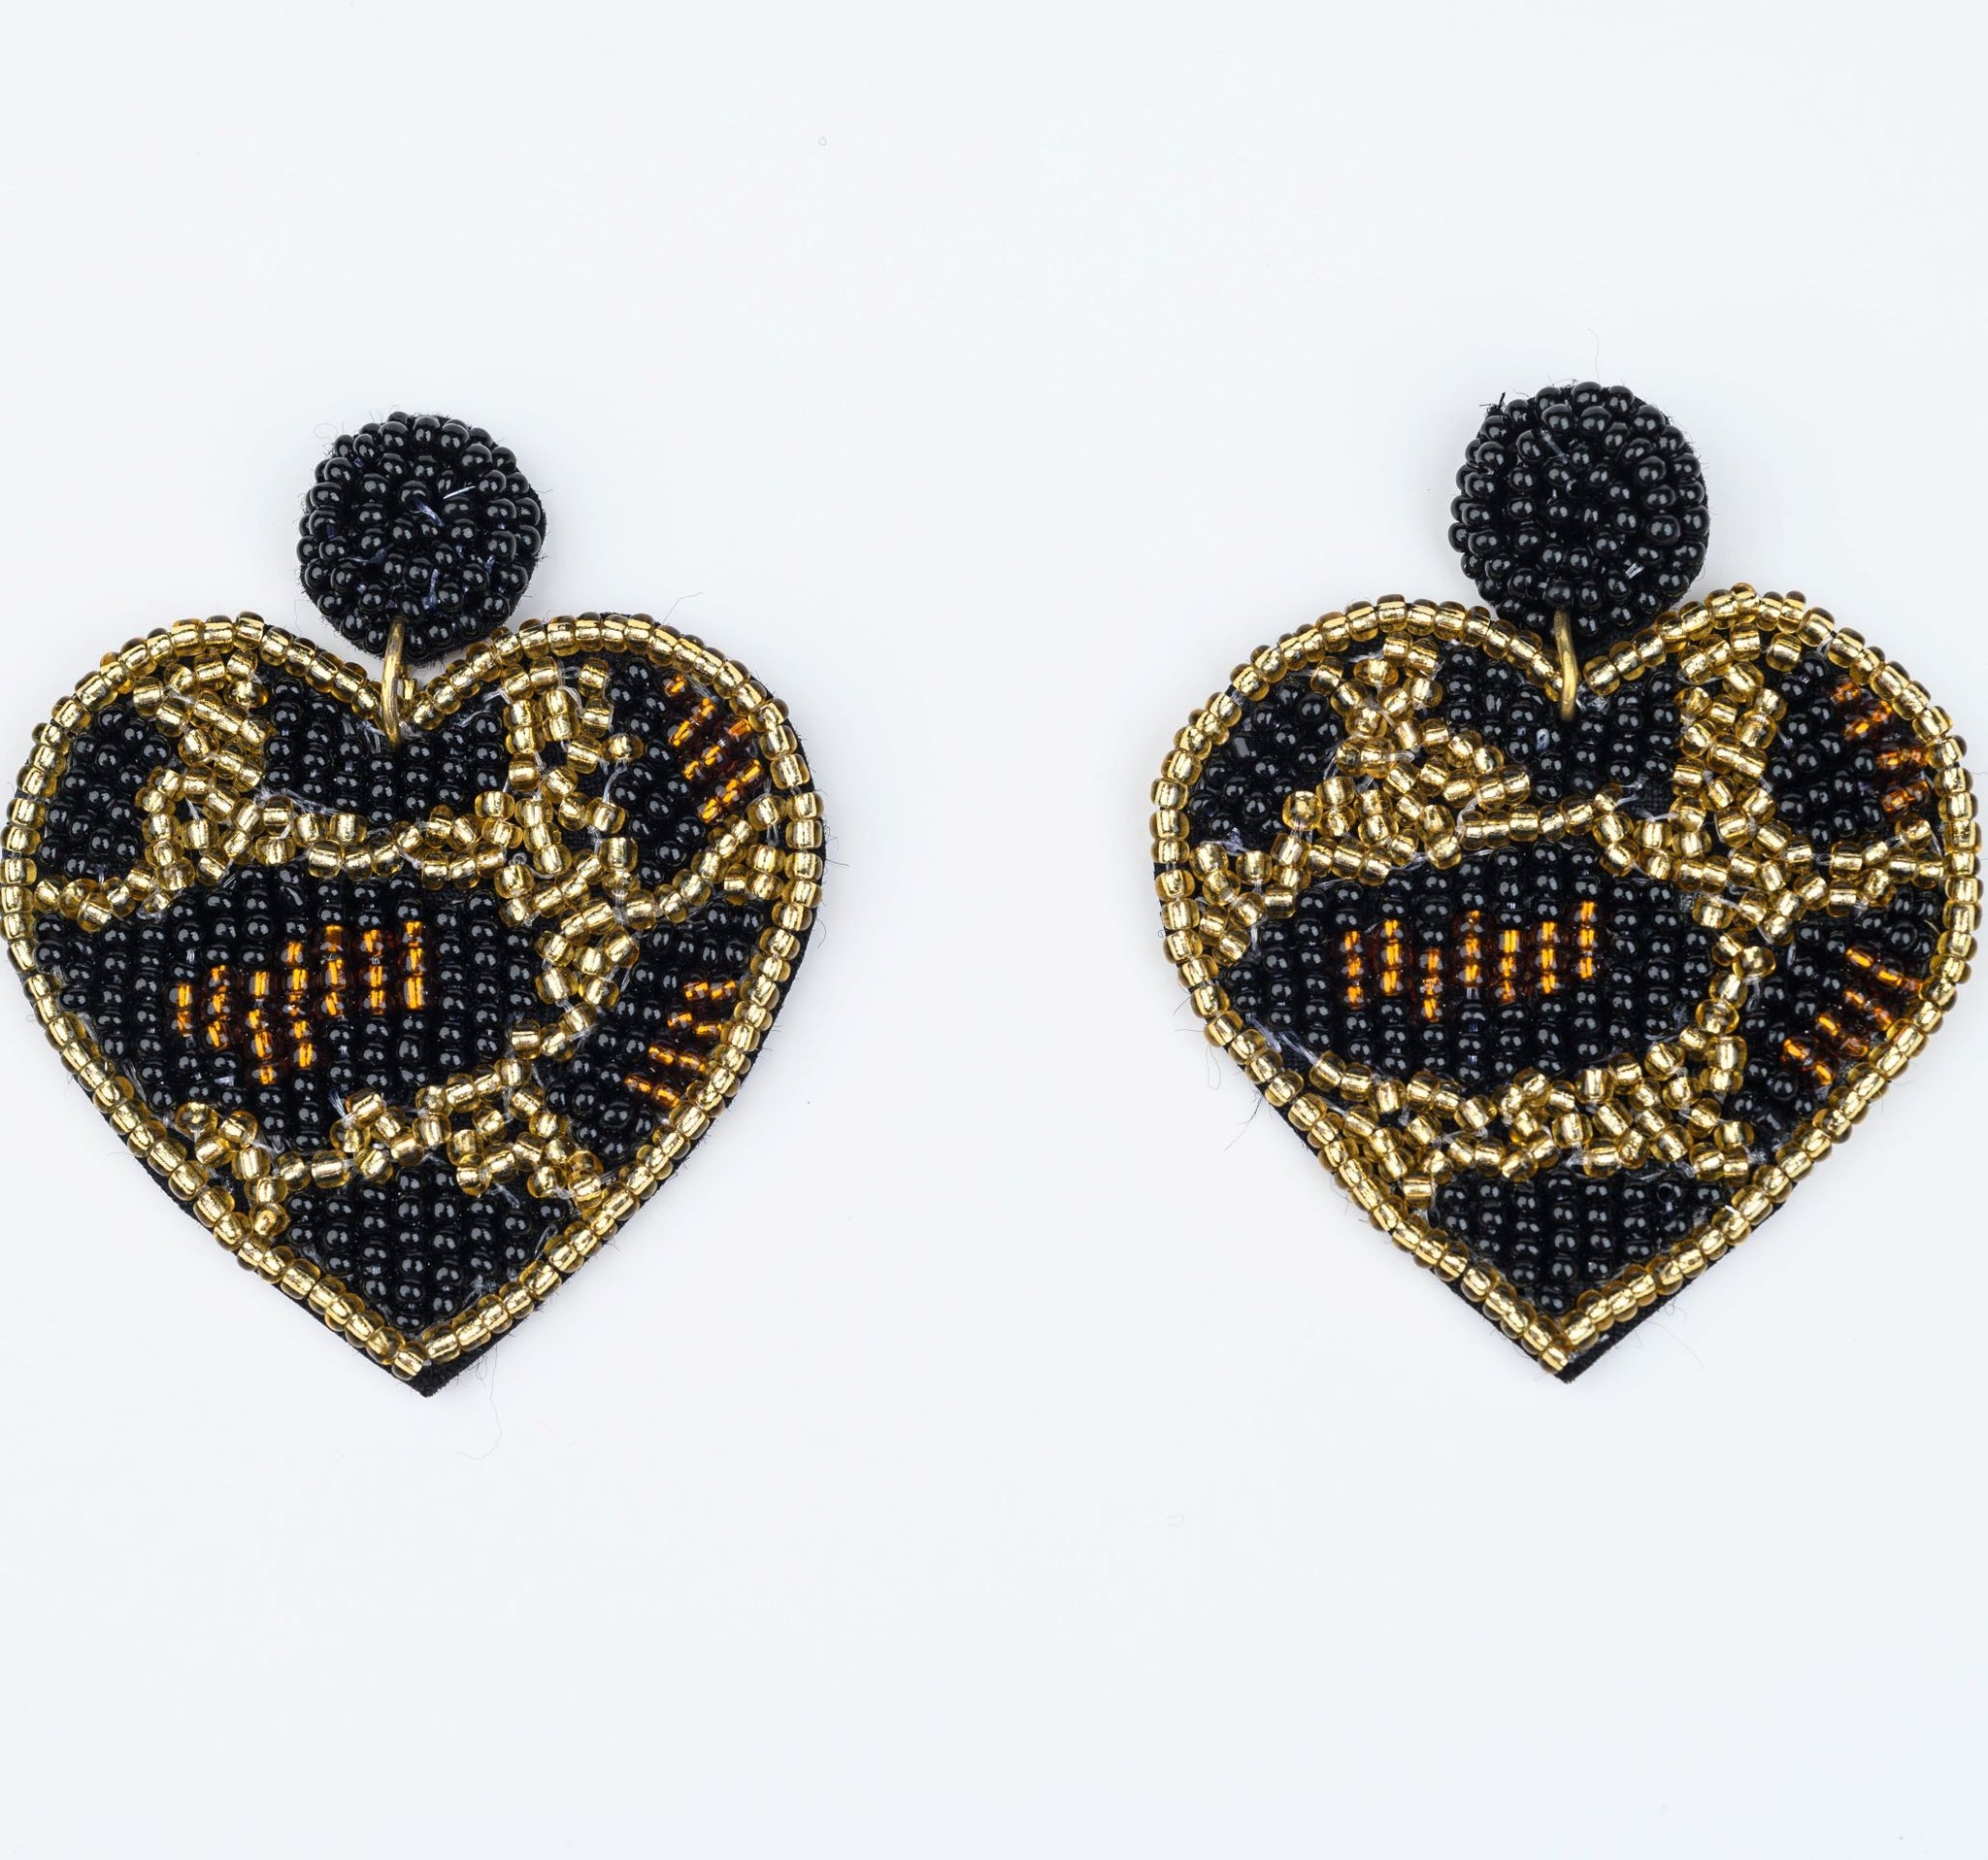 Leopard Print Beaded Heart Earrings Accessories Show Your Africa 